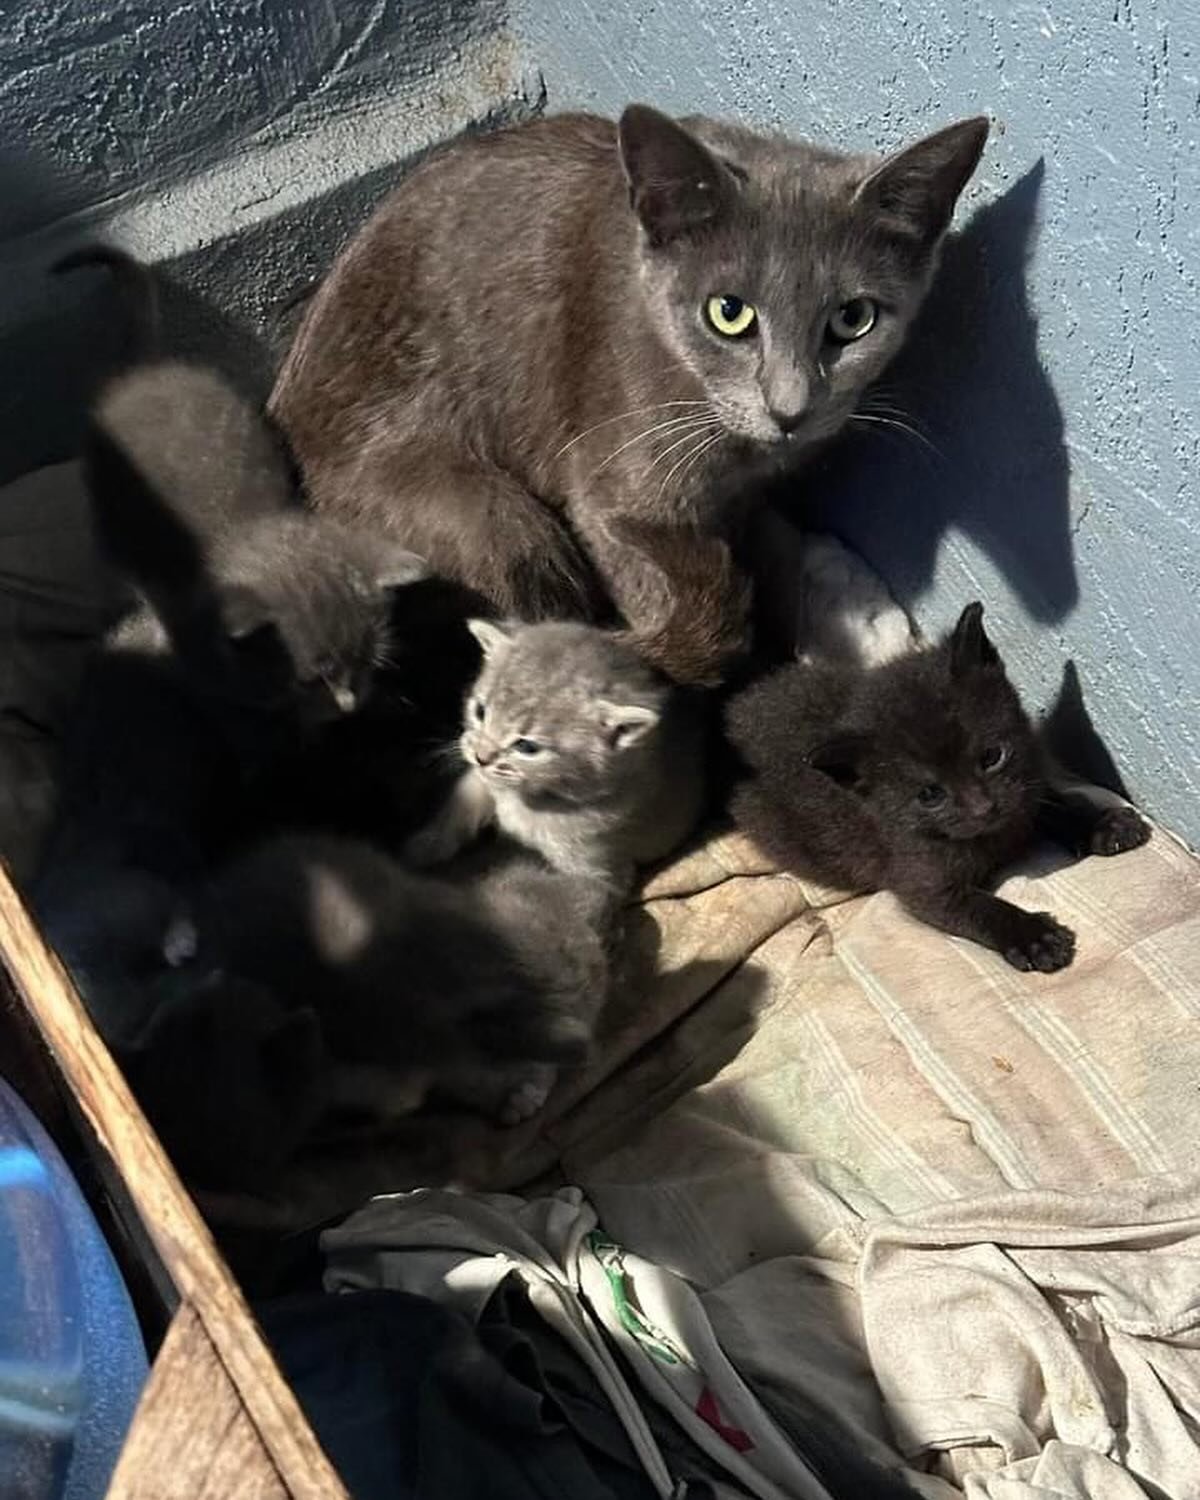 &ldquo;Hey can you guys help I have over 40 cats and kittens in my backyard&rdquo; 
If you feed cats in your area, you took on that responsibility,  which means you need to make a phone call or send an email for free resources to get those couple of 